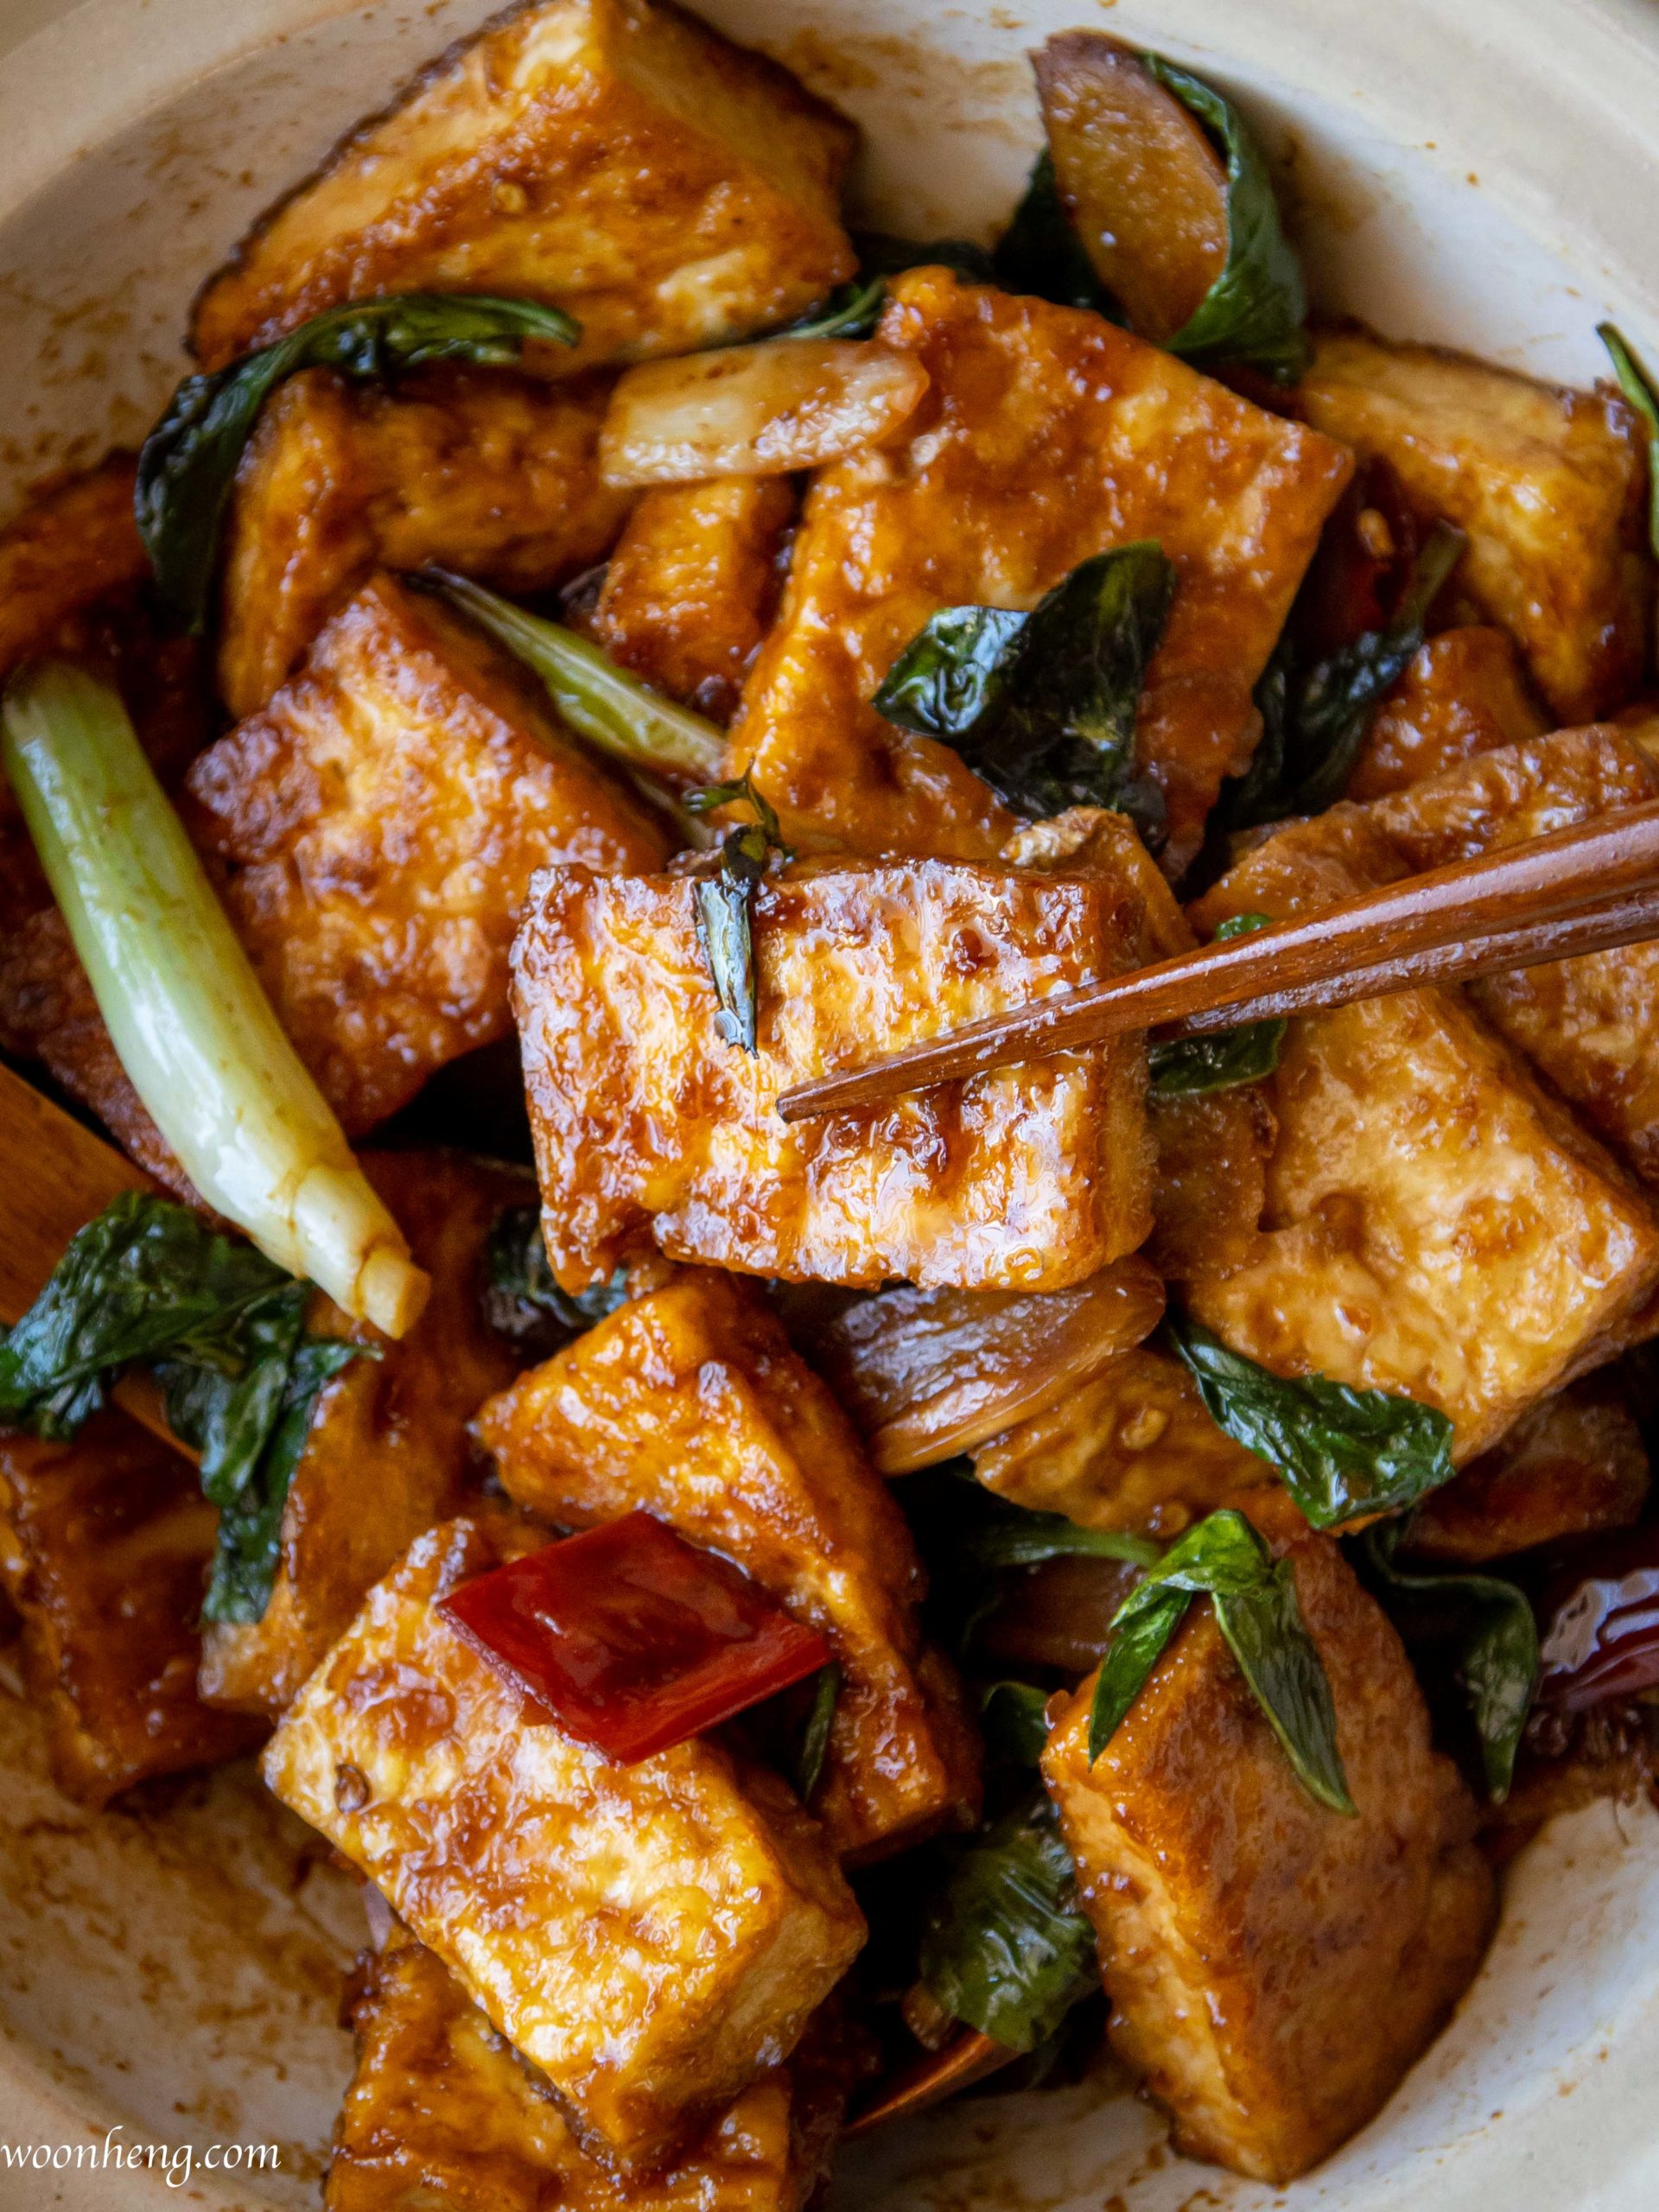 Aromatic and Easy Three cup (San Bei) Tofu You Need - WoonHeng